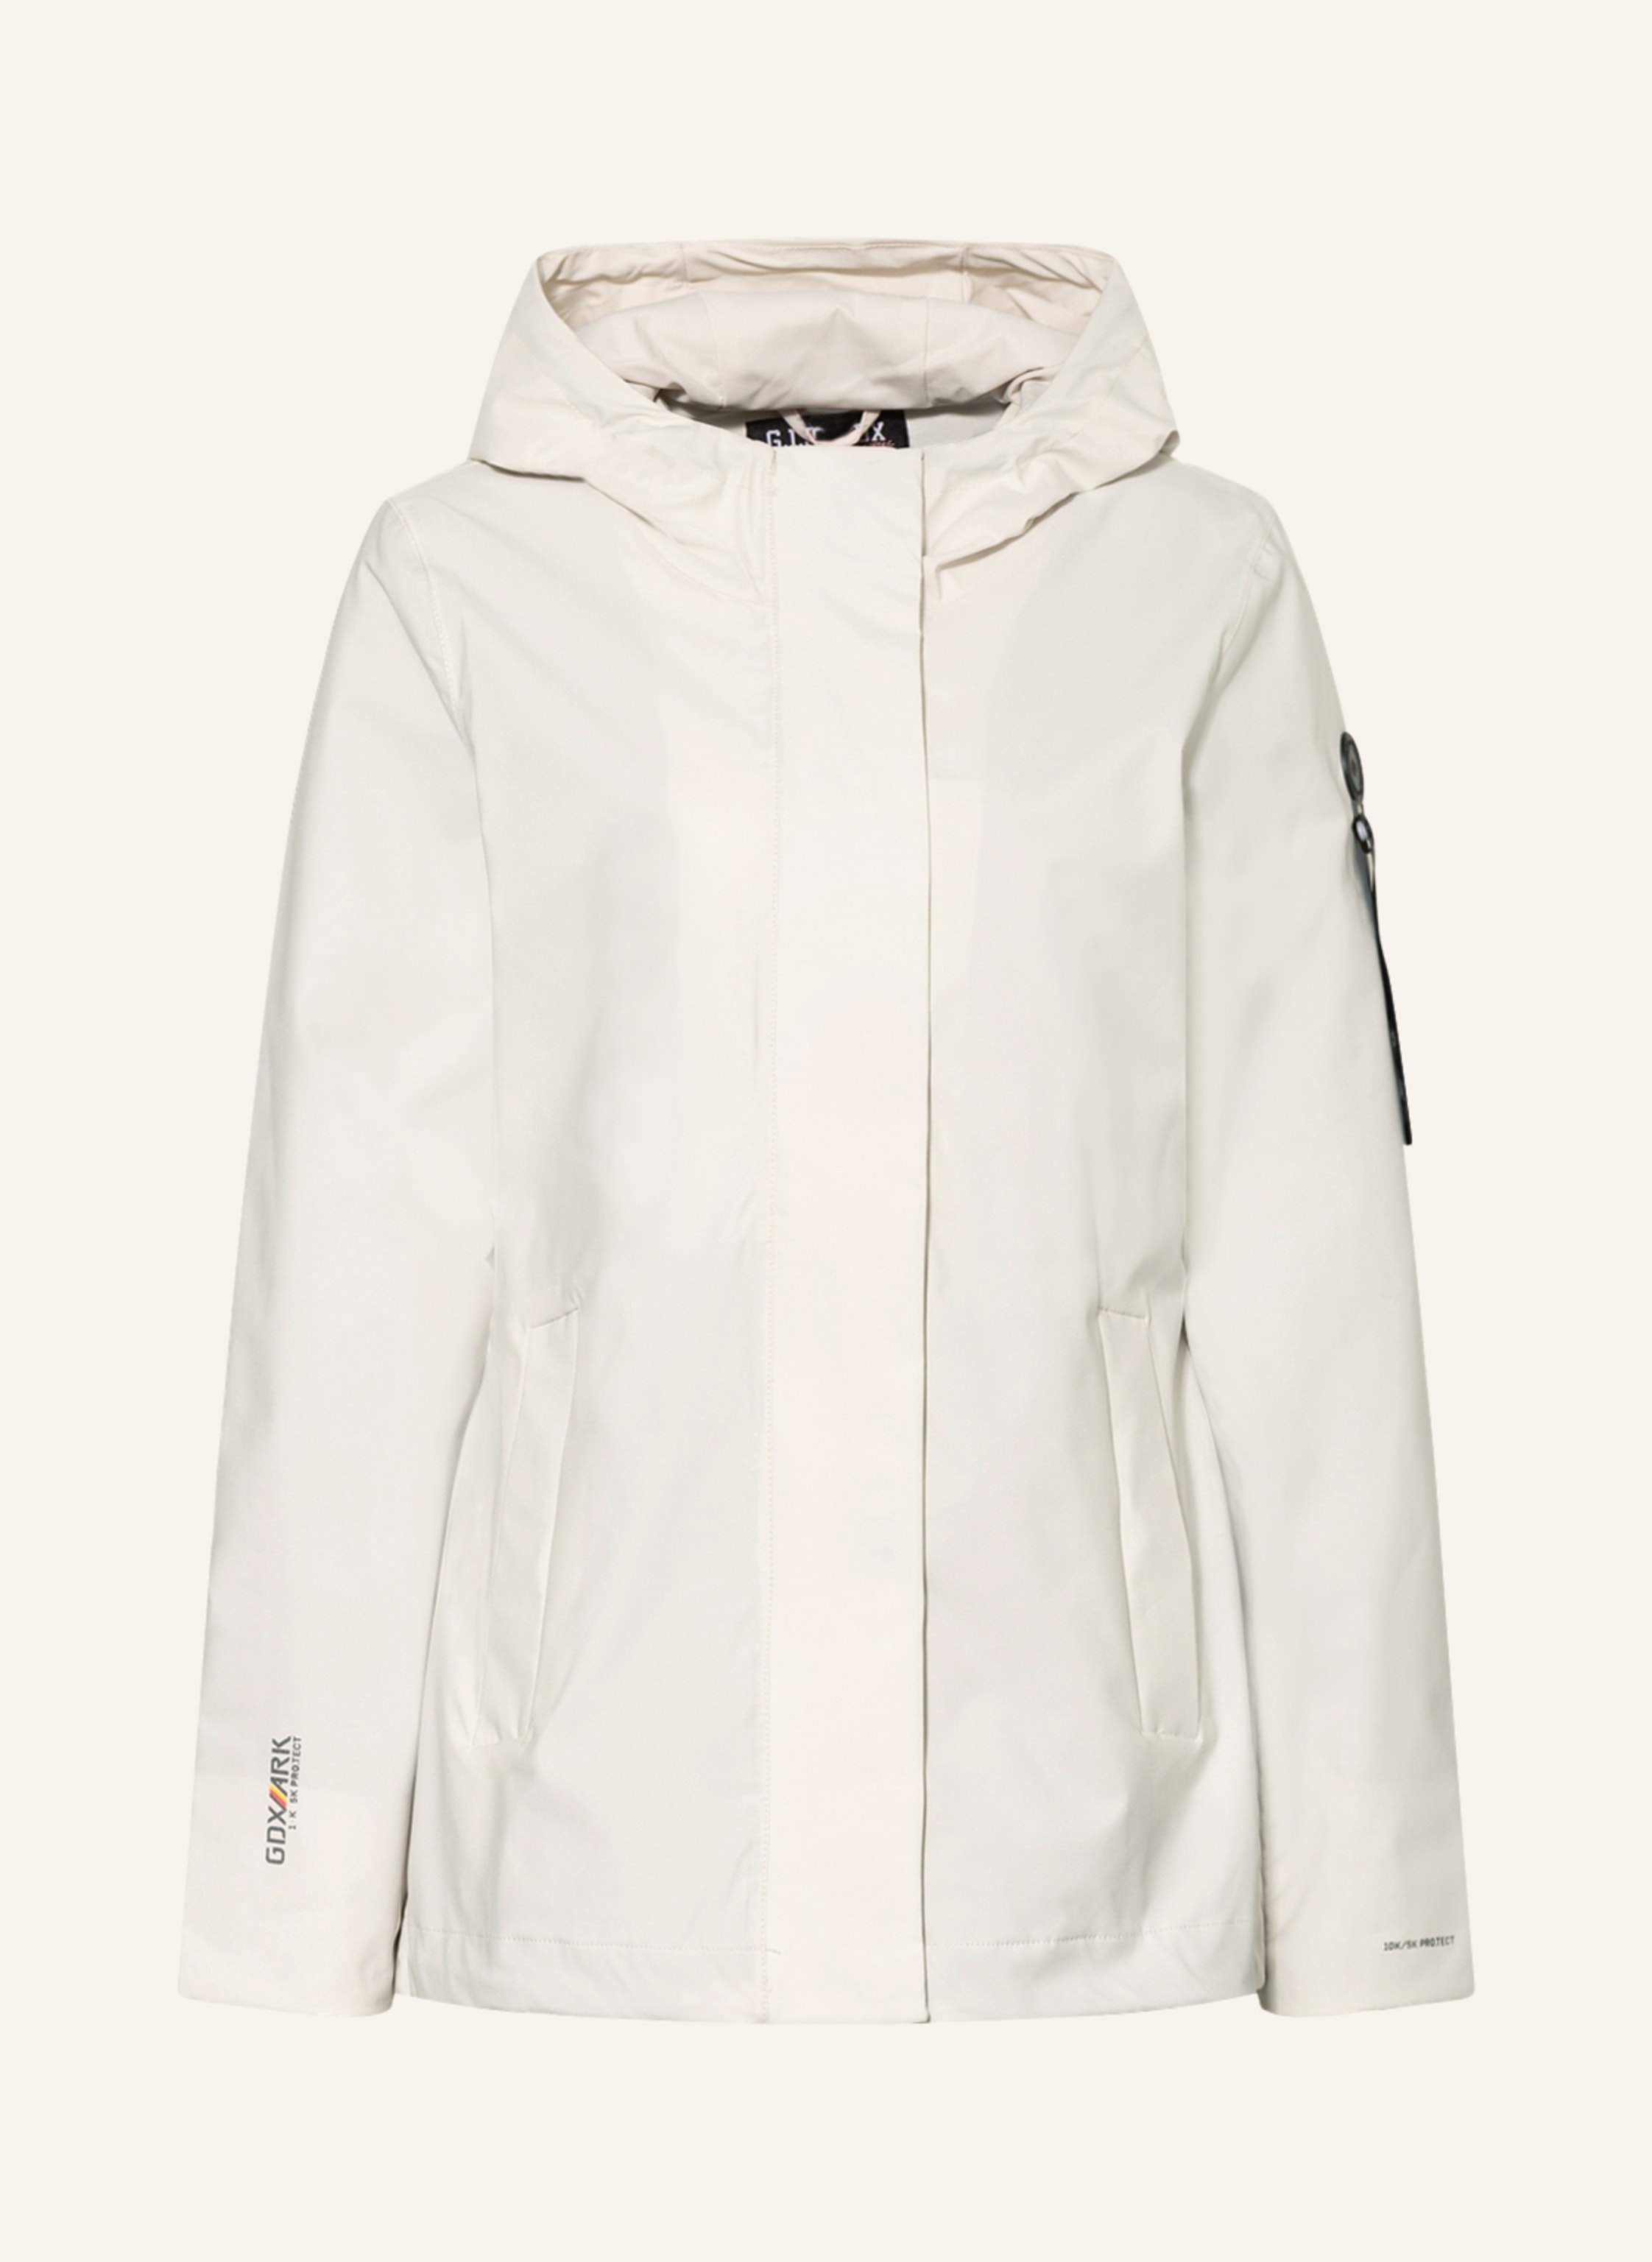 G.I.G.A. DX by killtec Outdoor jacket GS 152 in cream